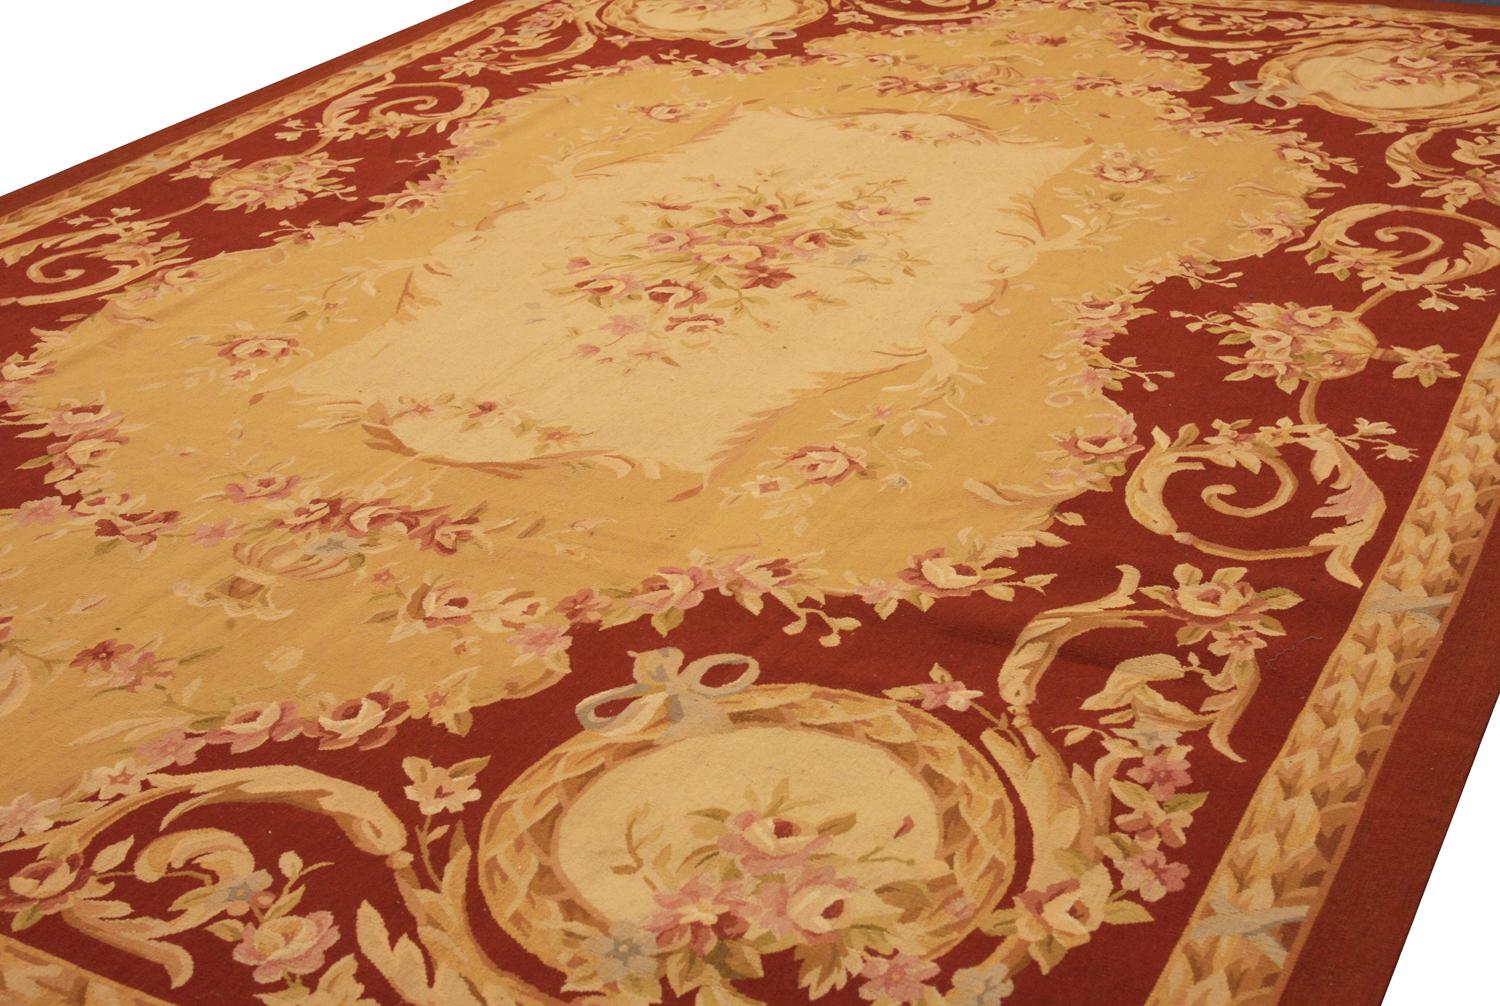 This magnificent Chinese Aubusson flat-weave rug with medallion and floral design is a perfect addition to any room. The ivory color is beautiful and the floral medallion with elegant ornamentation of flowers is simply majestic. It's sure to add